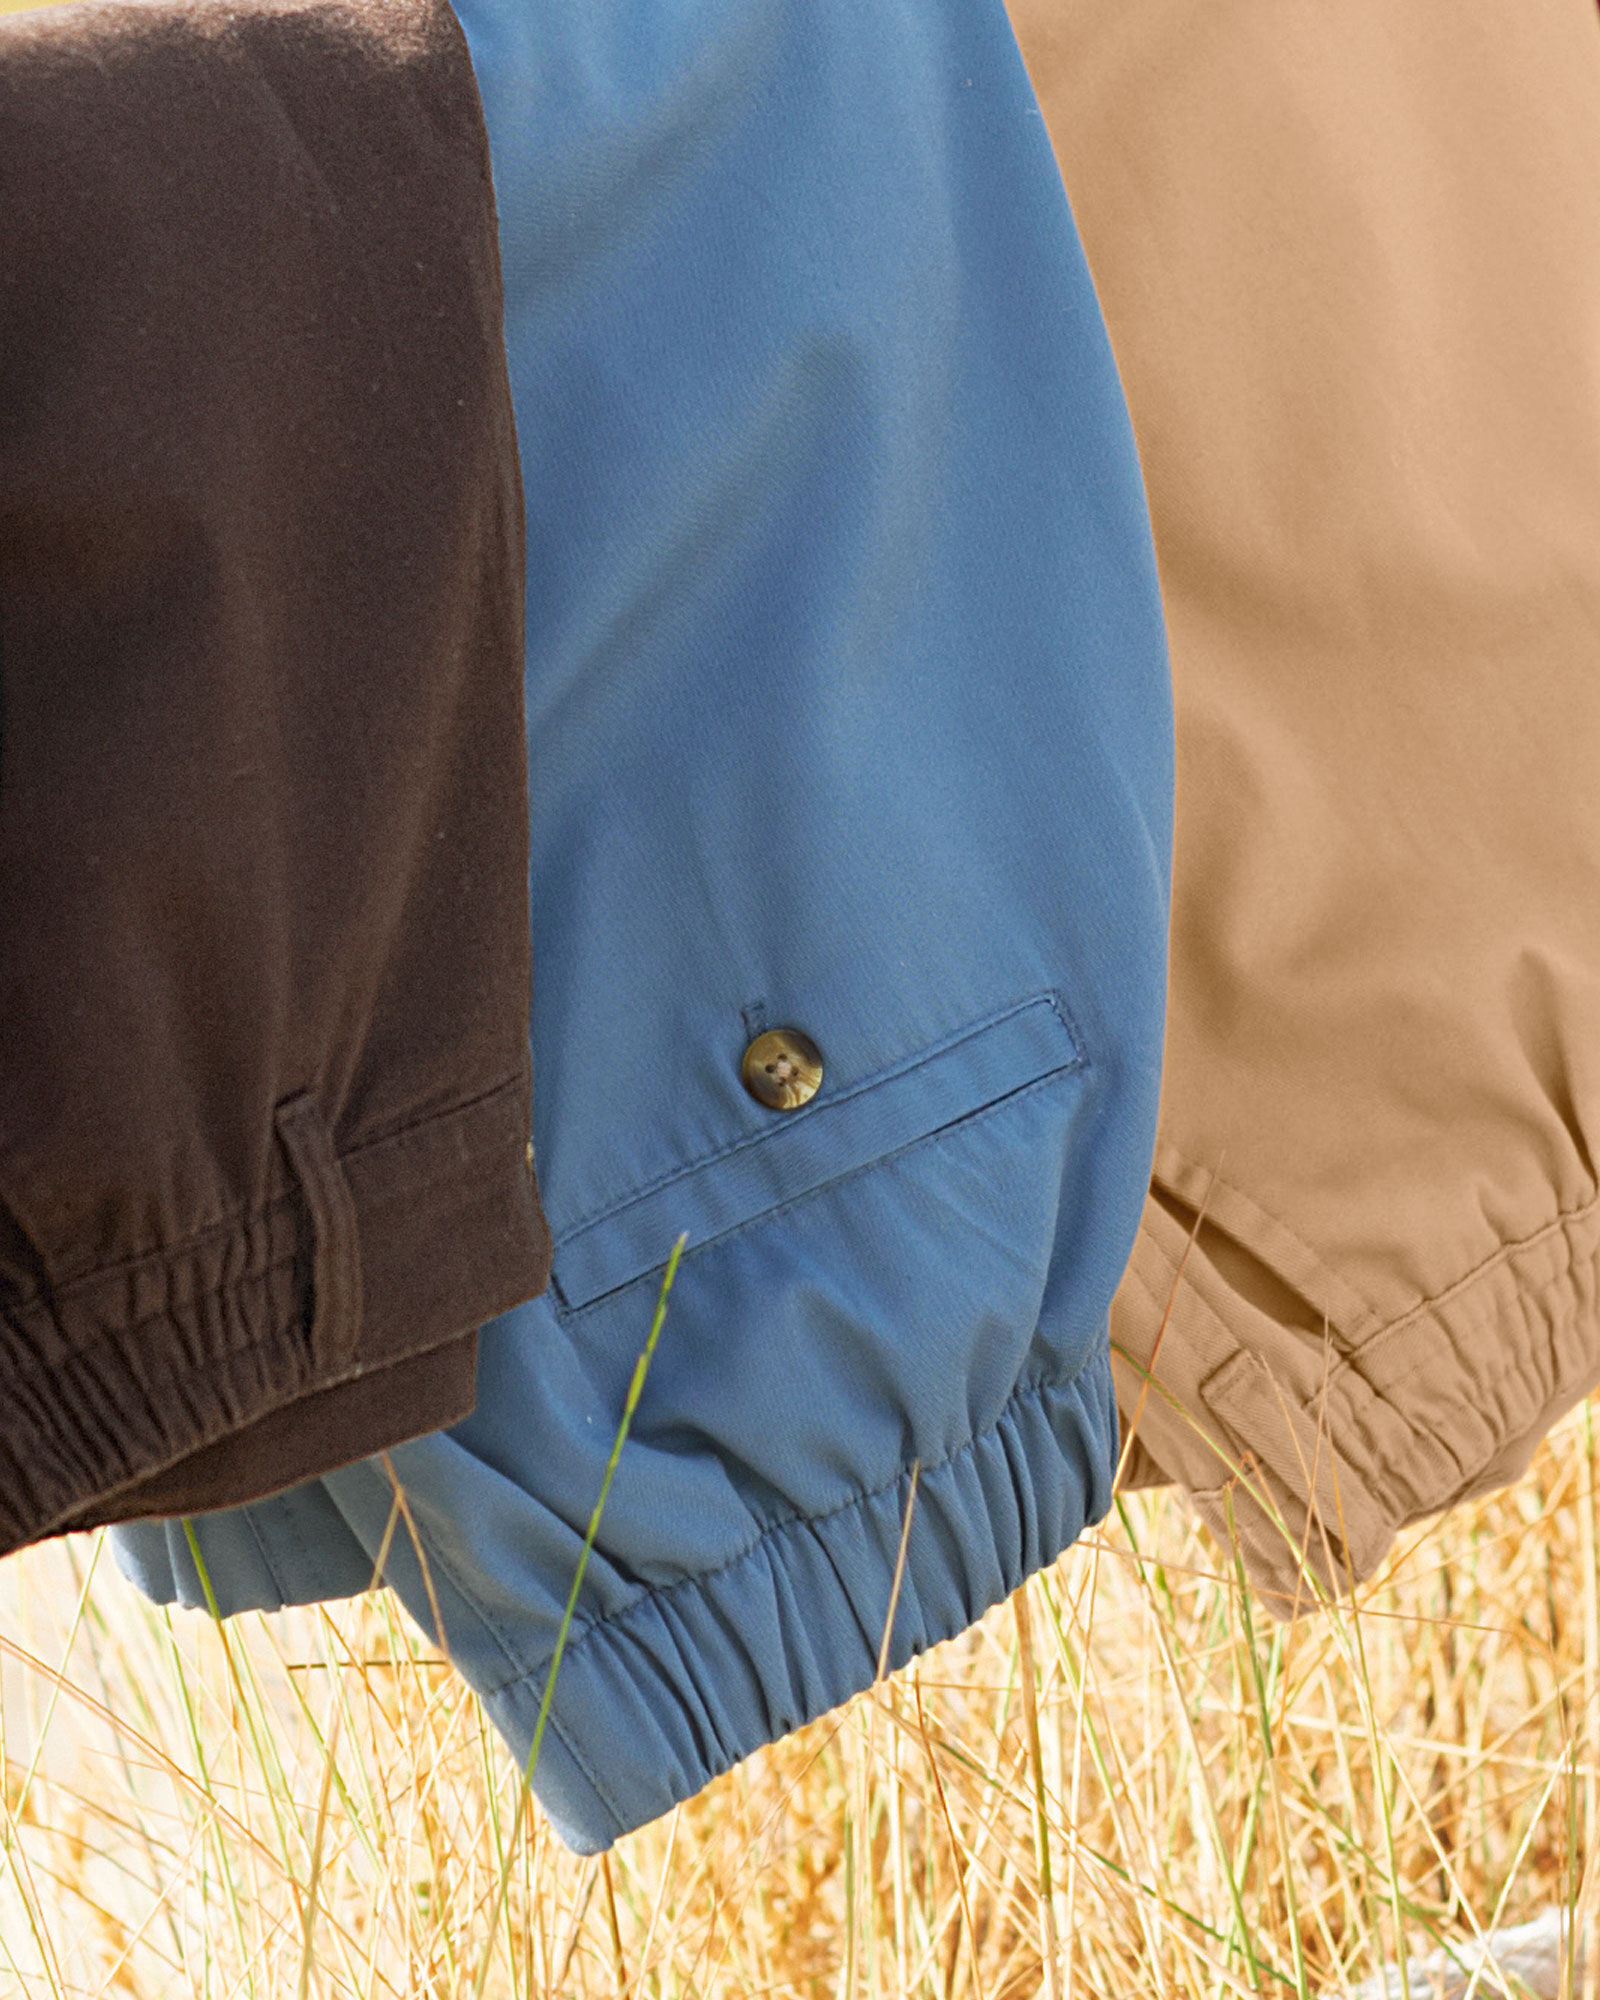 cotton traders cargo pants